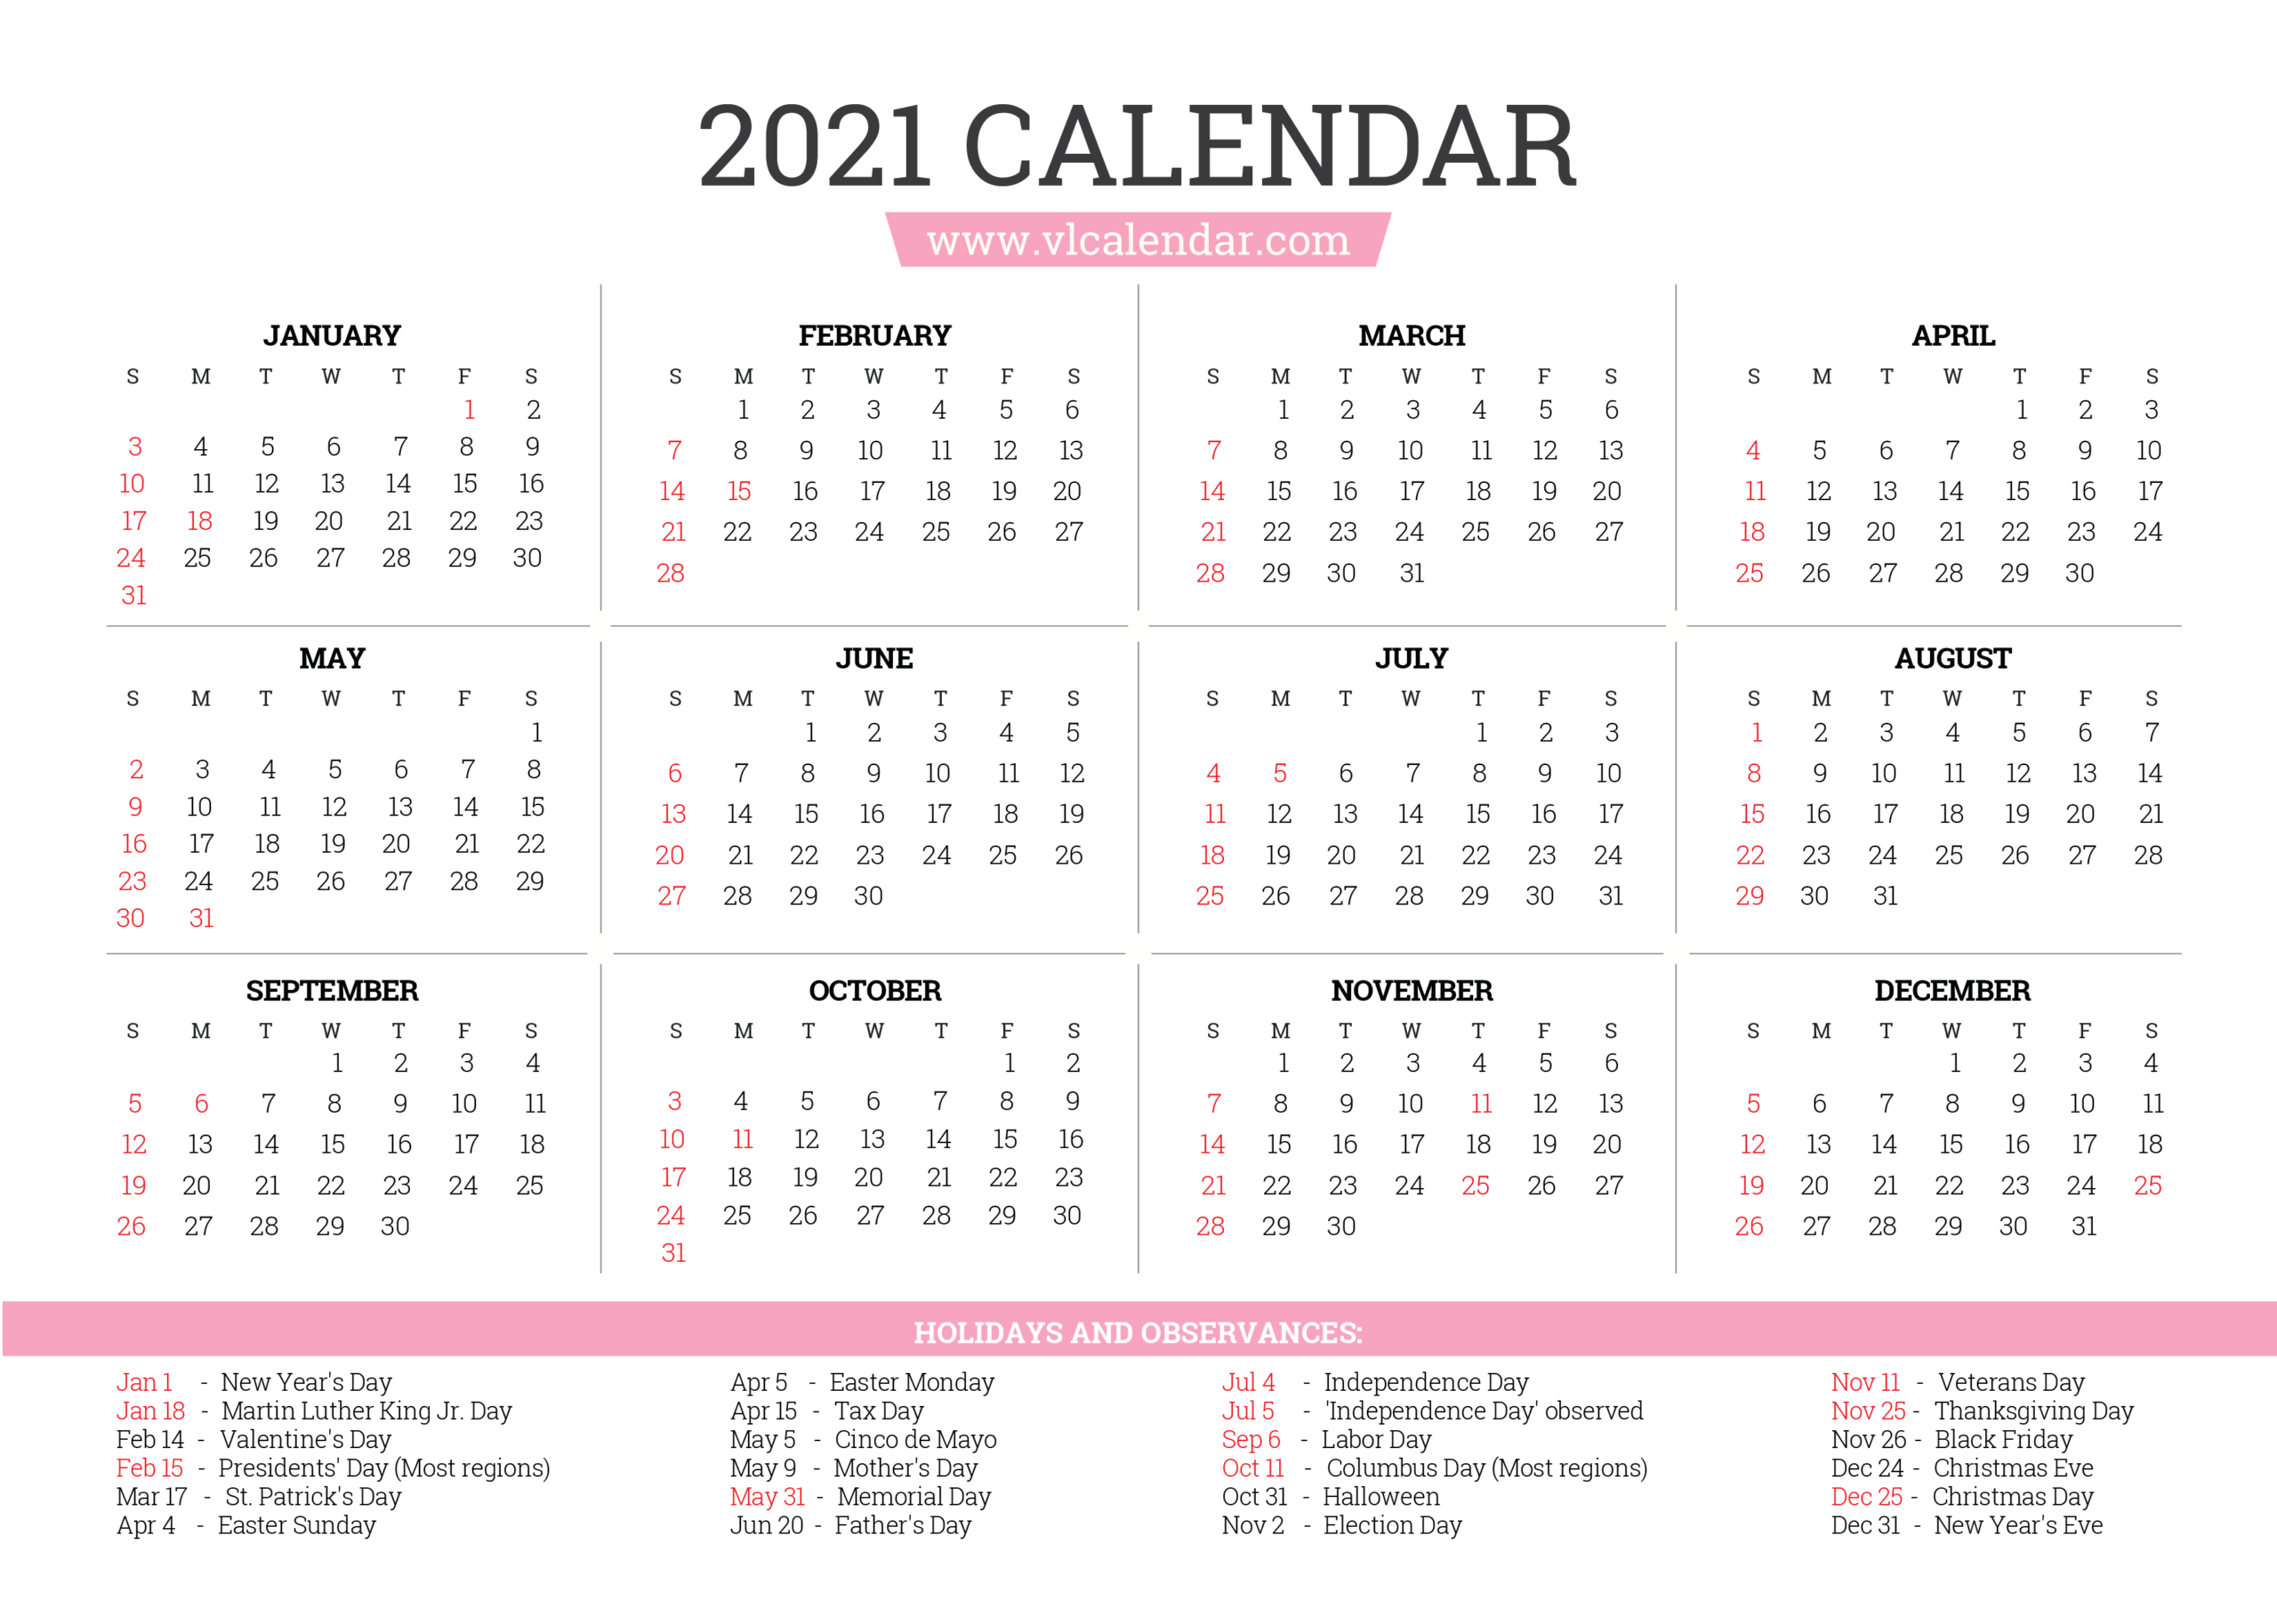 Free Printable 2021 Calendar Templates With Holidays - Vl-Free Calender For October 2021 81/2 X 11